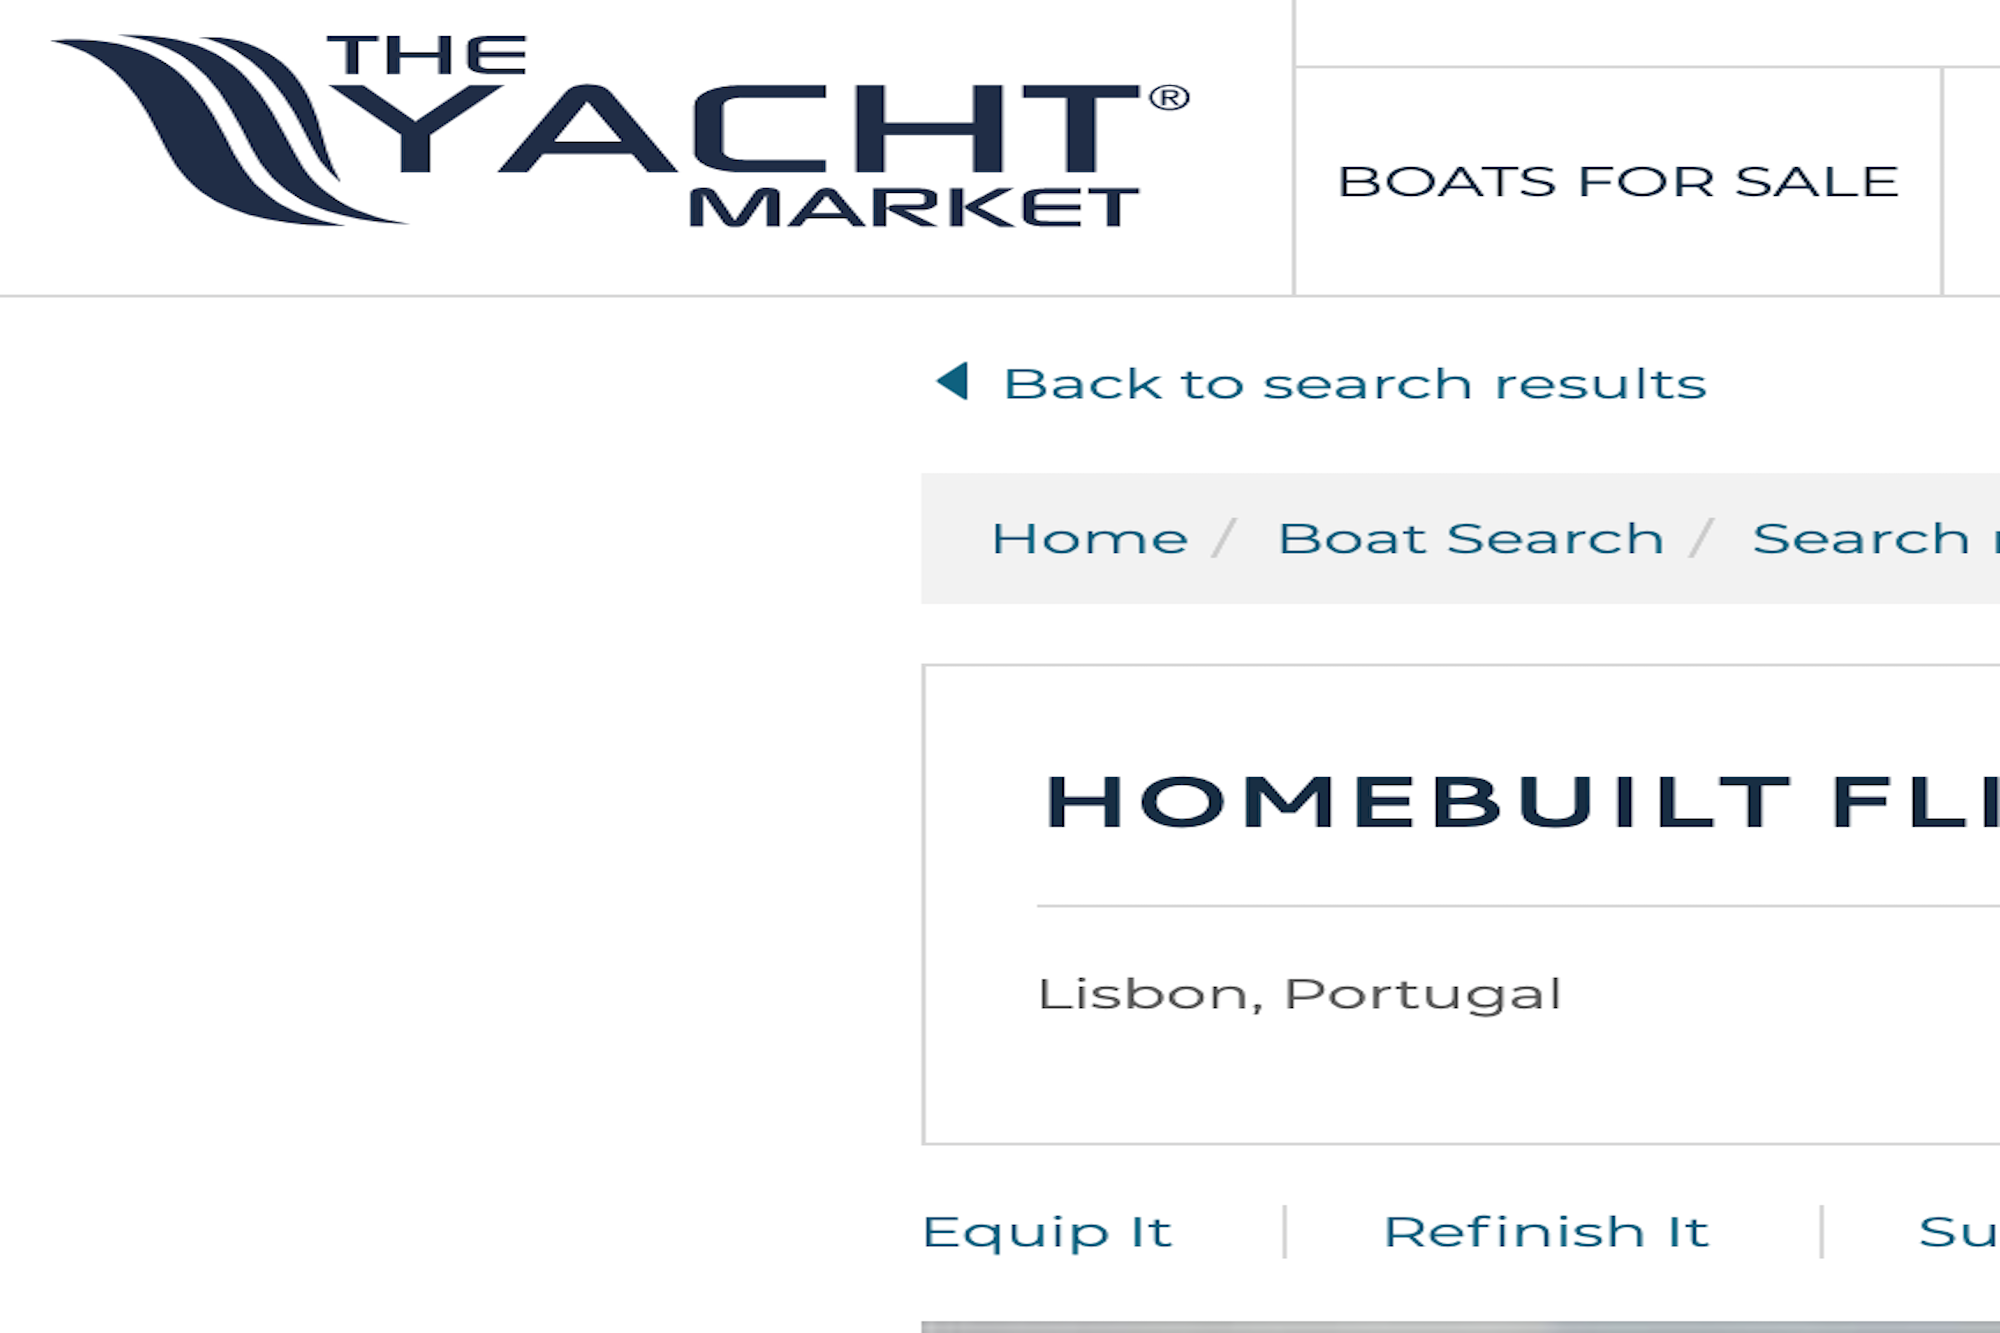 Blue Fin commences promo partnership with The Yacht Market